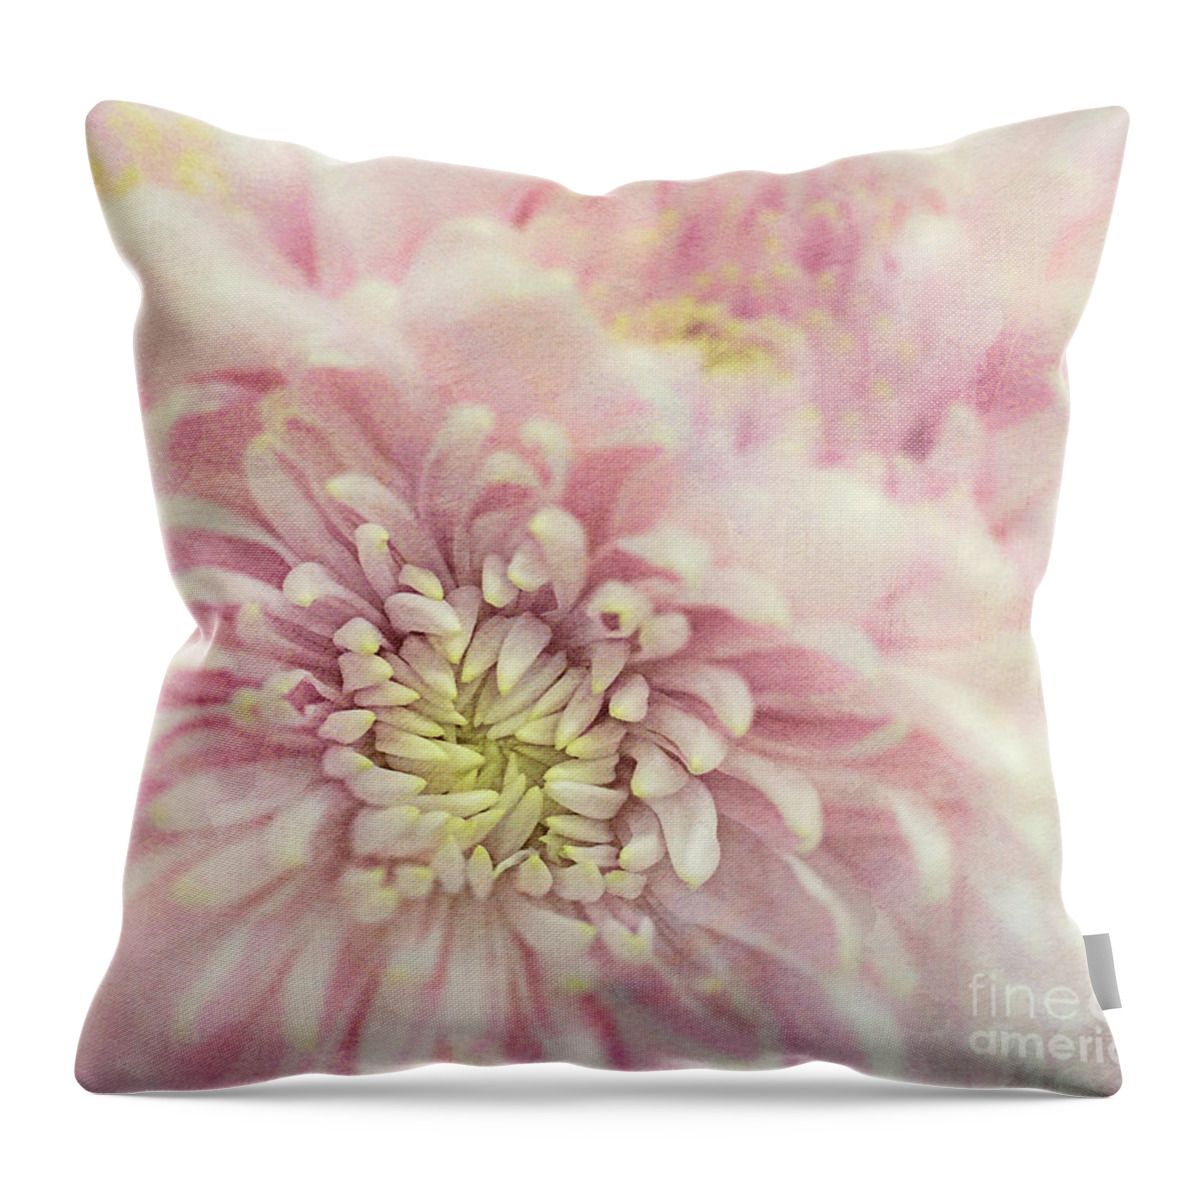 Dahlia Throw Pillow featuring the photograph Textured In Pink by Arlene Carmel